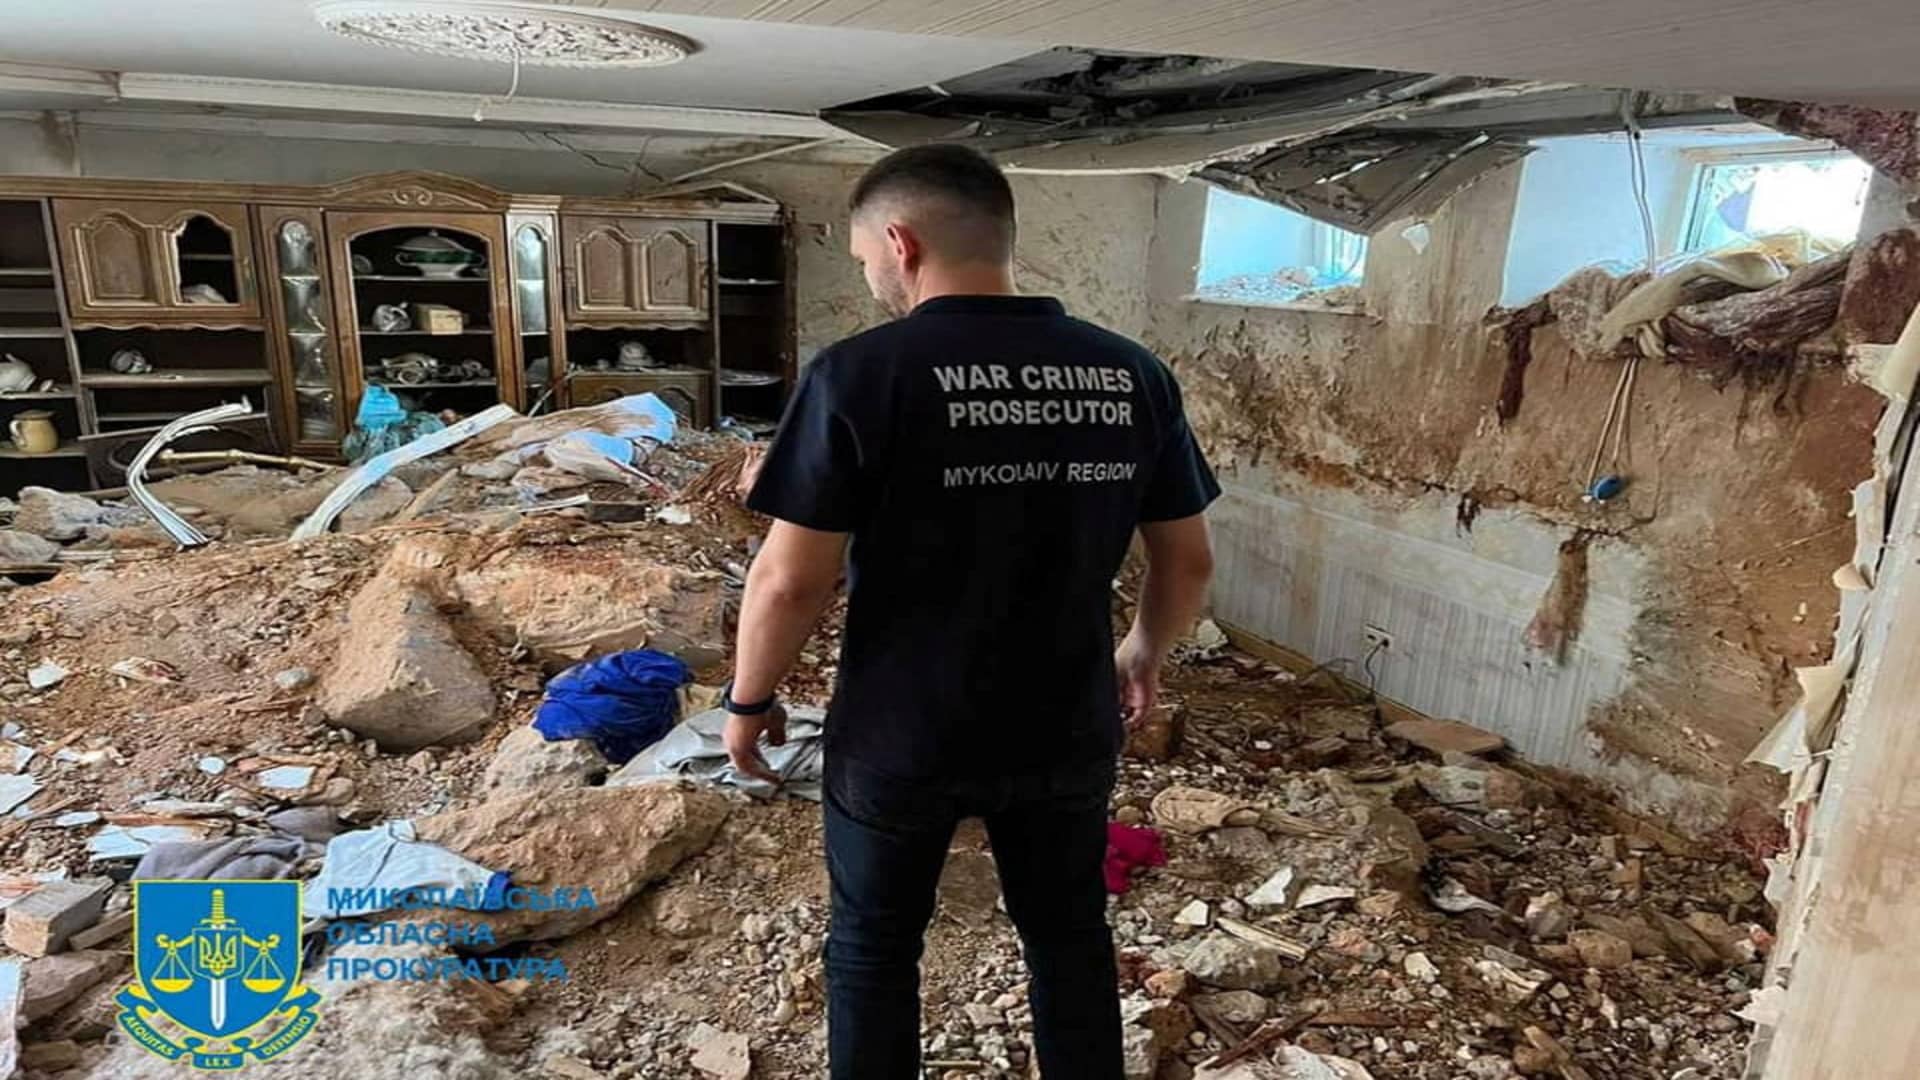 A war crimes prosecutor examines the damage in a destroyed building, as Russia's attack on Ukraine continues, following shelling in Mykolaiv, Ukraine, in this handout picture released on July 31, 2022.